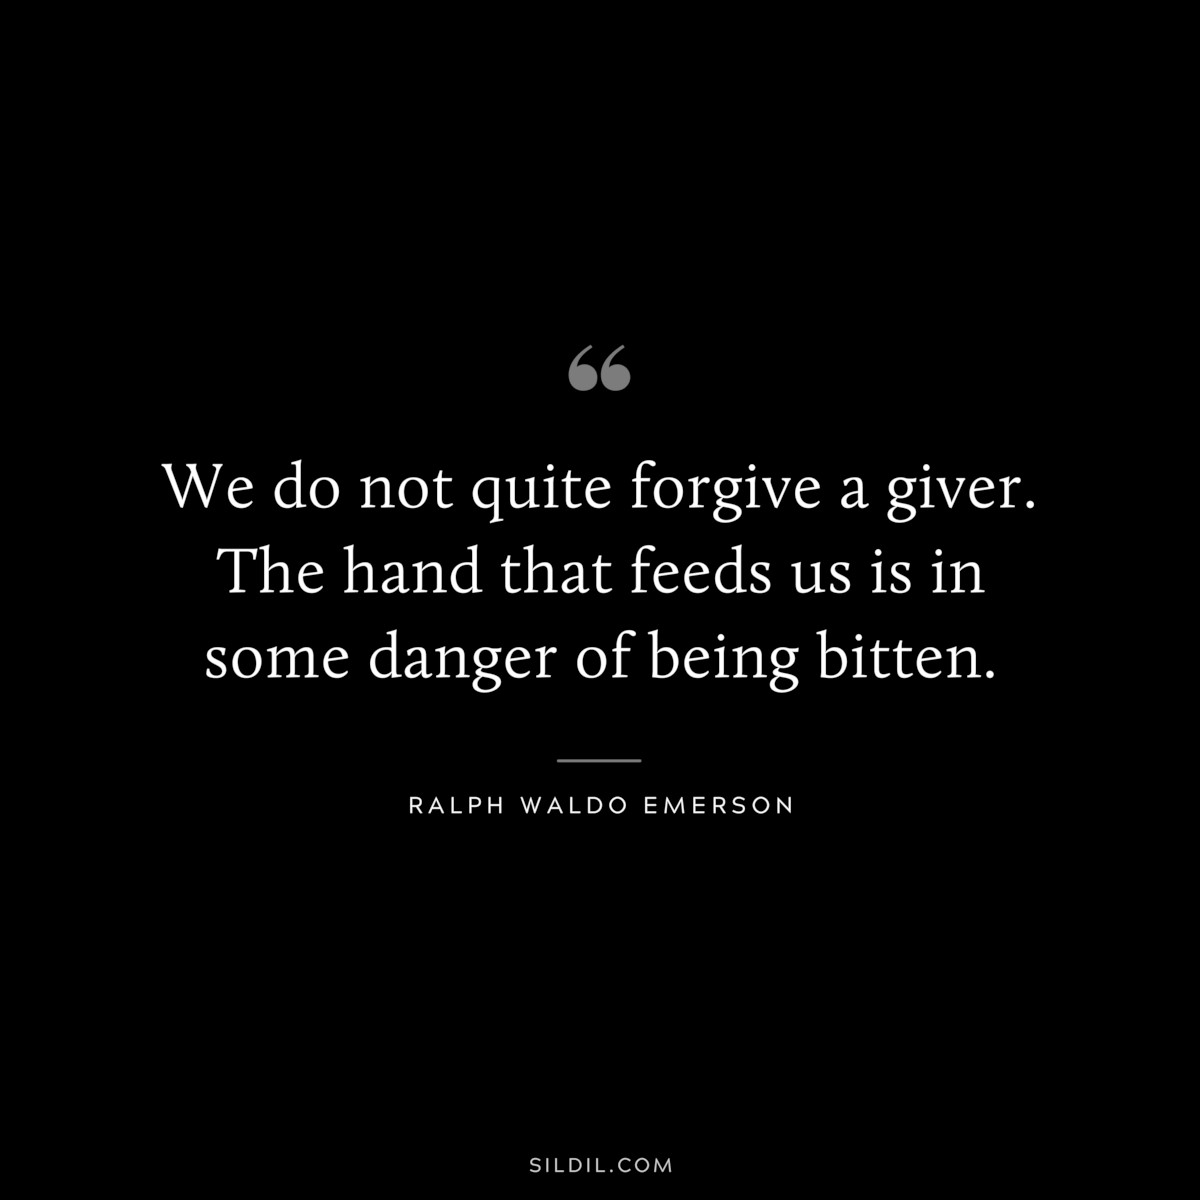 We do not quite forgive a giver. The hand that feeds us is in some danger of being bitten. — Ralph Waldo Emerson